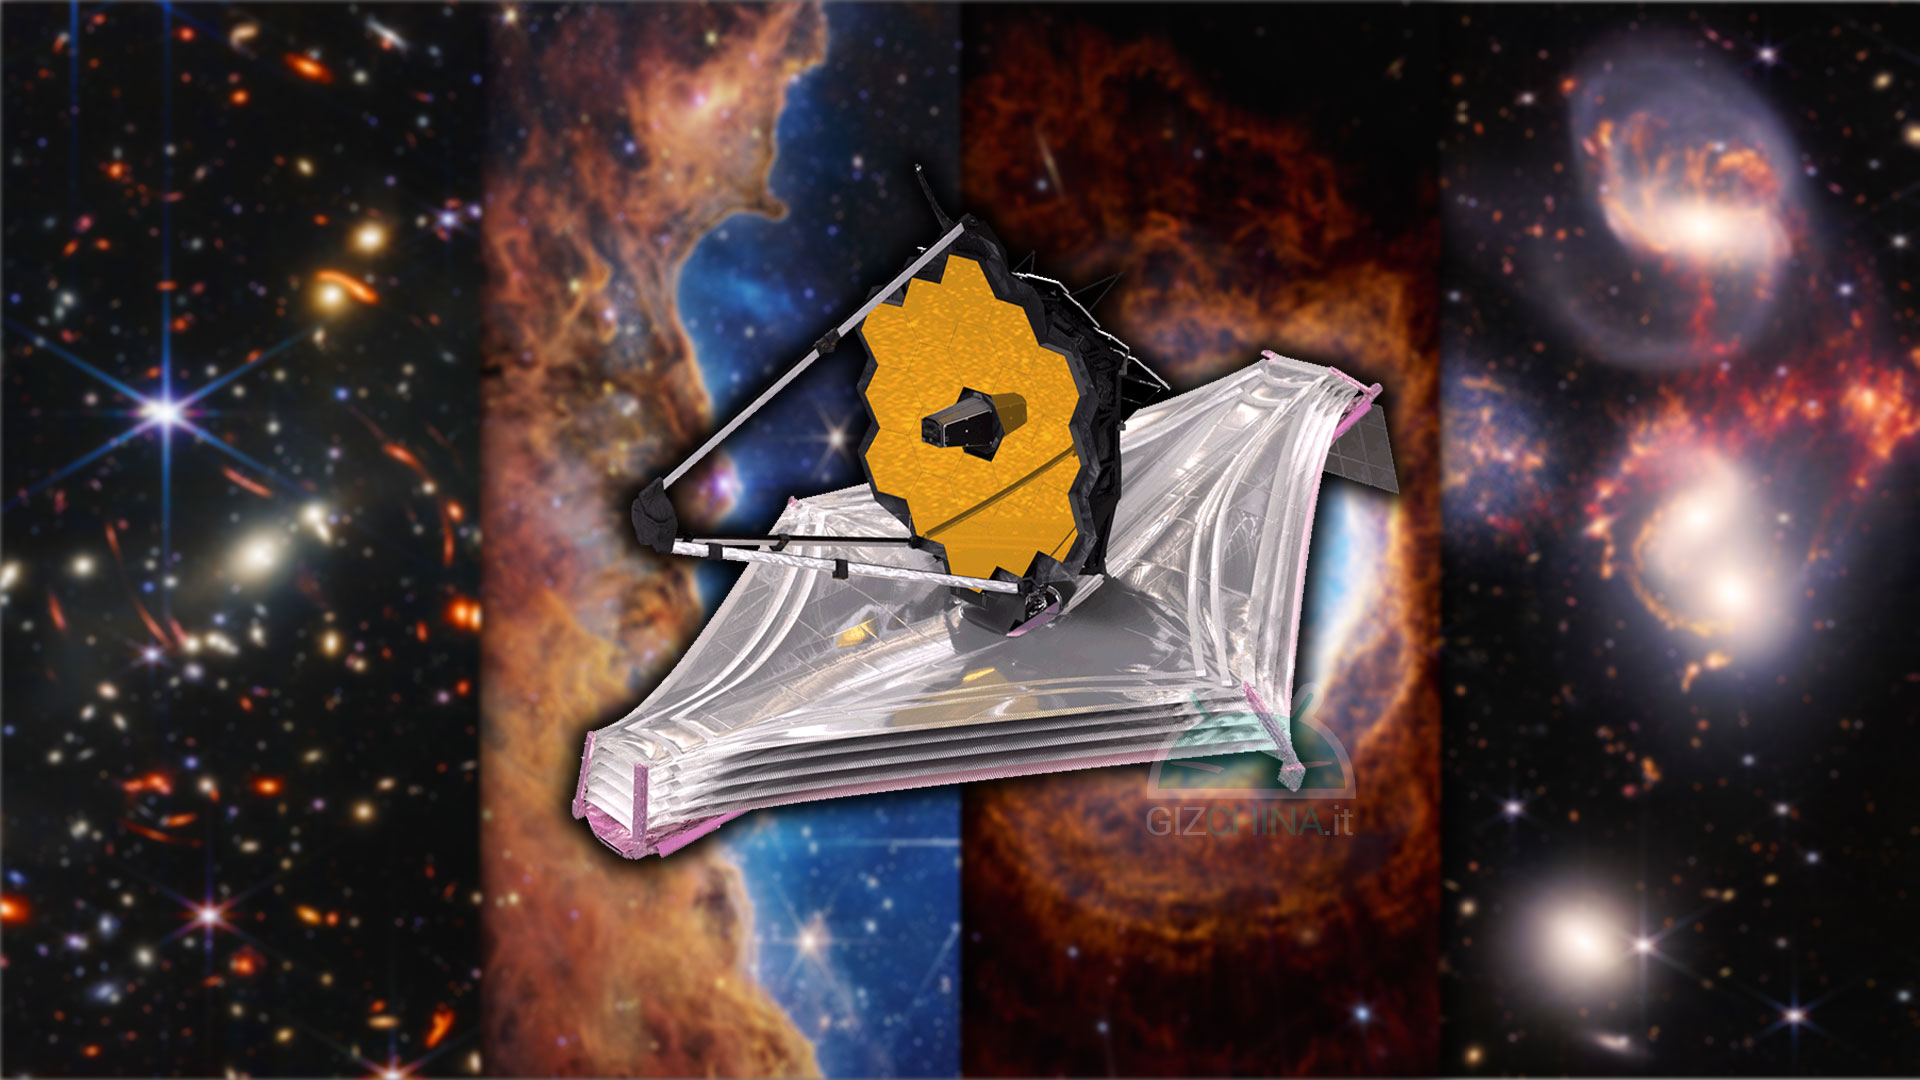 Download the incredible wallpapers of the James Webb telescope